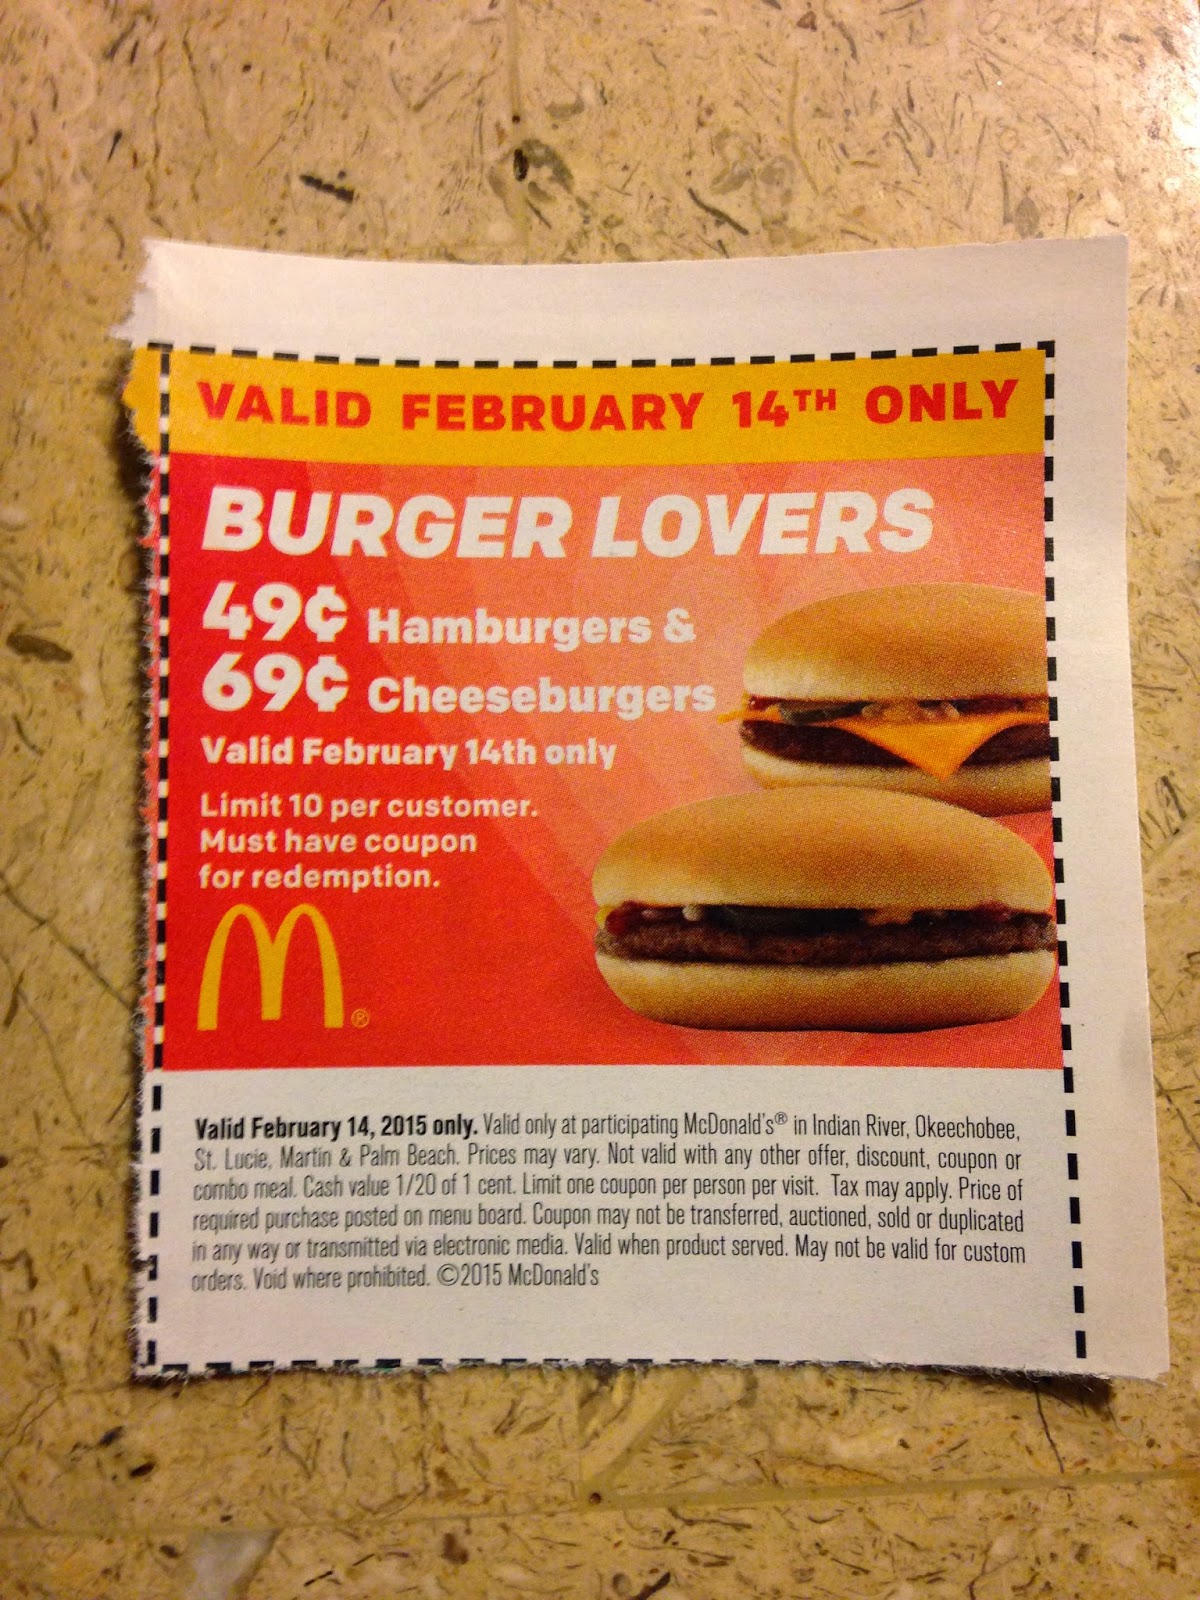 "Valid February 14th only" "BURGER LOVERS" "49¢ Hamburgers & 69¢ Cheeseburgers" "Valid February 14th only" "Limit 10 per customer." "Must have coupon for redemption."